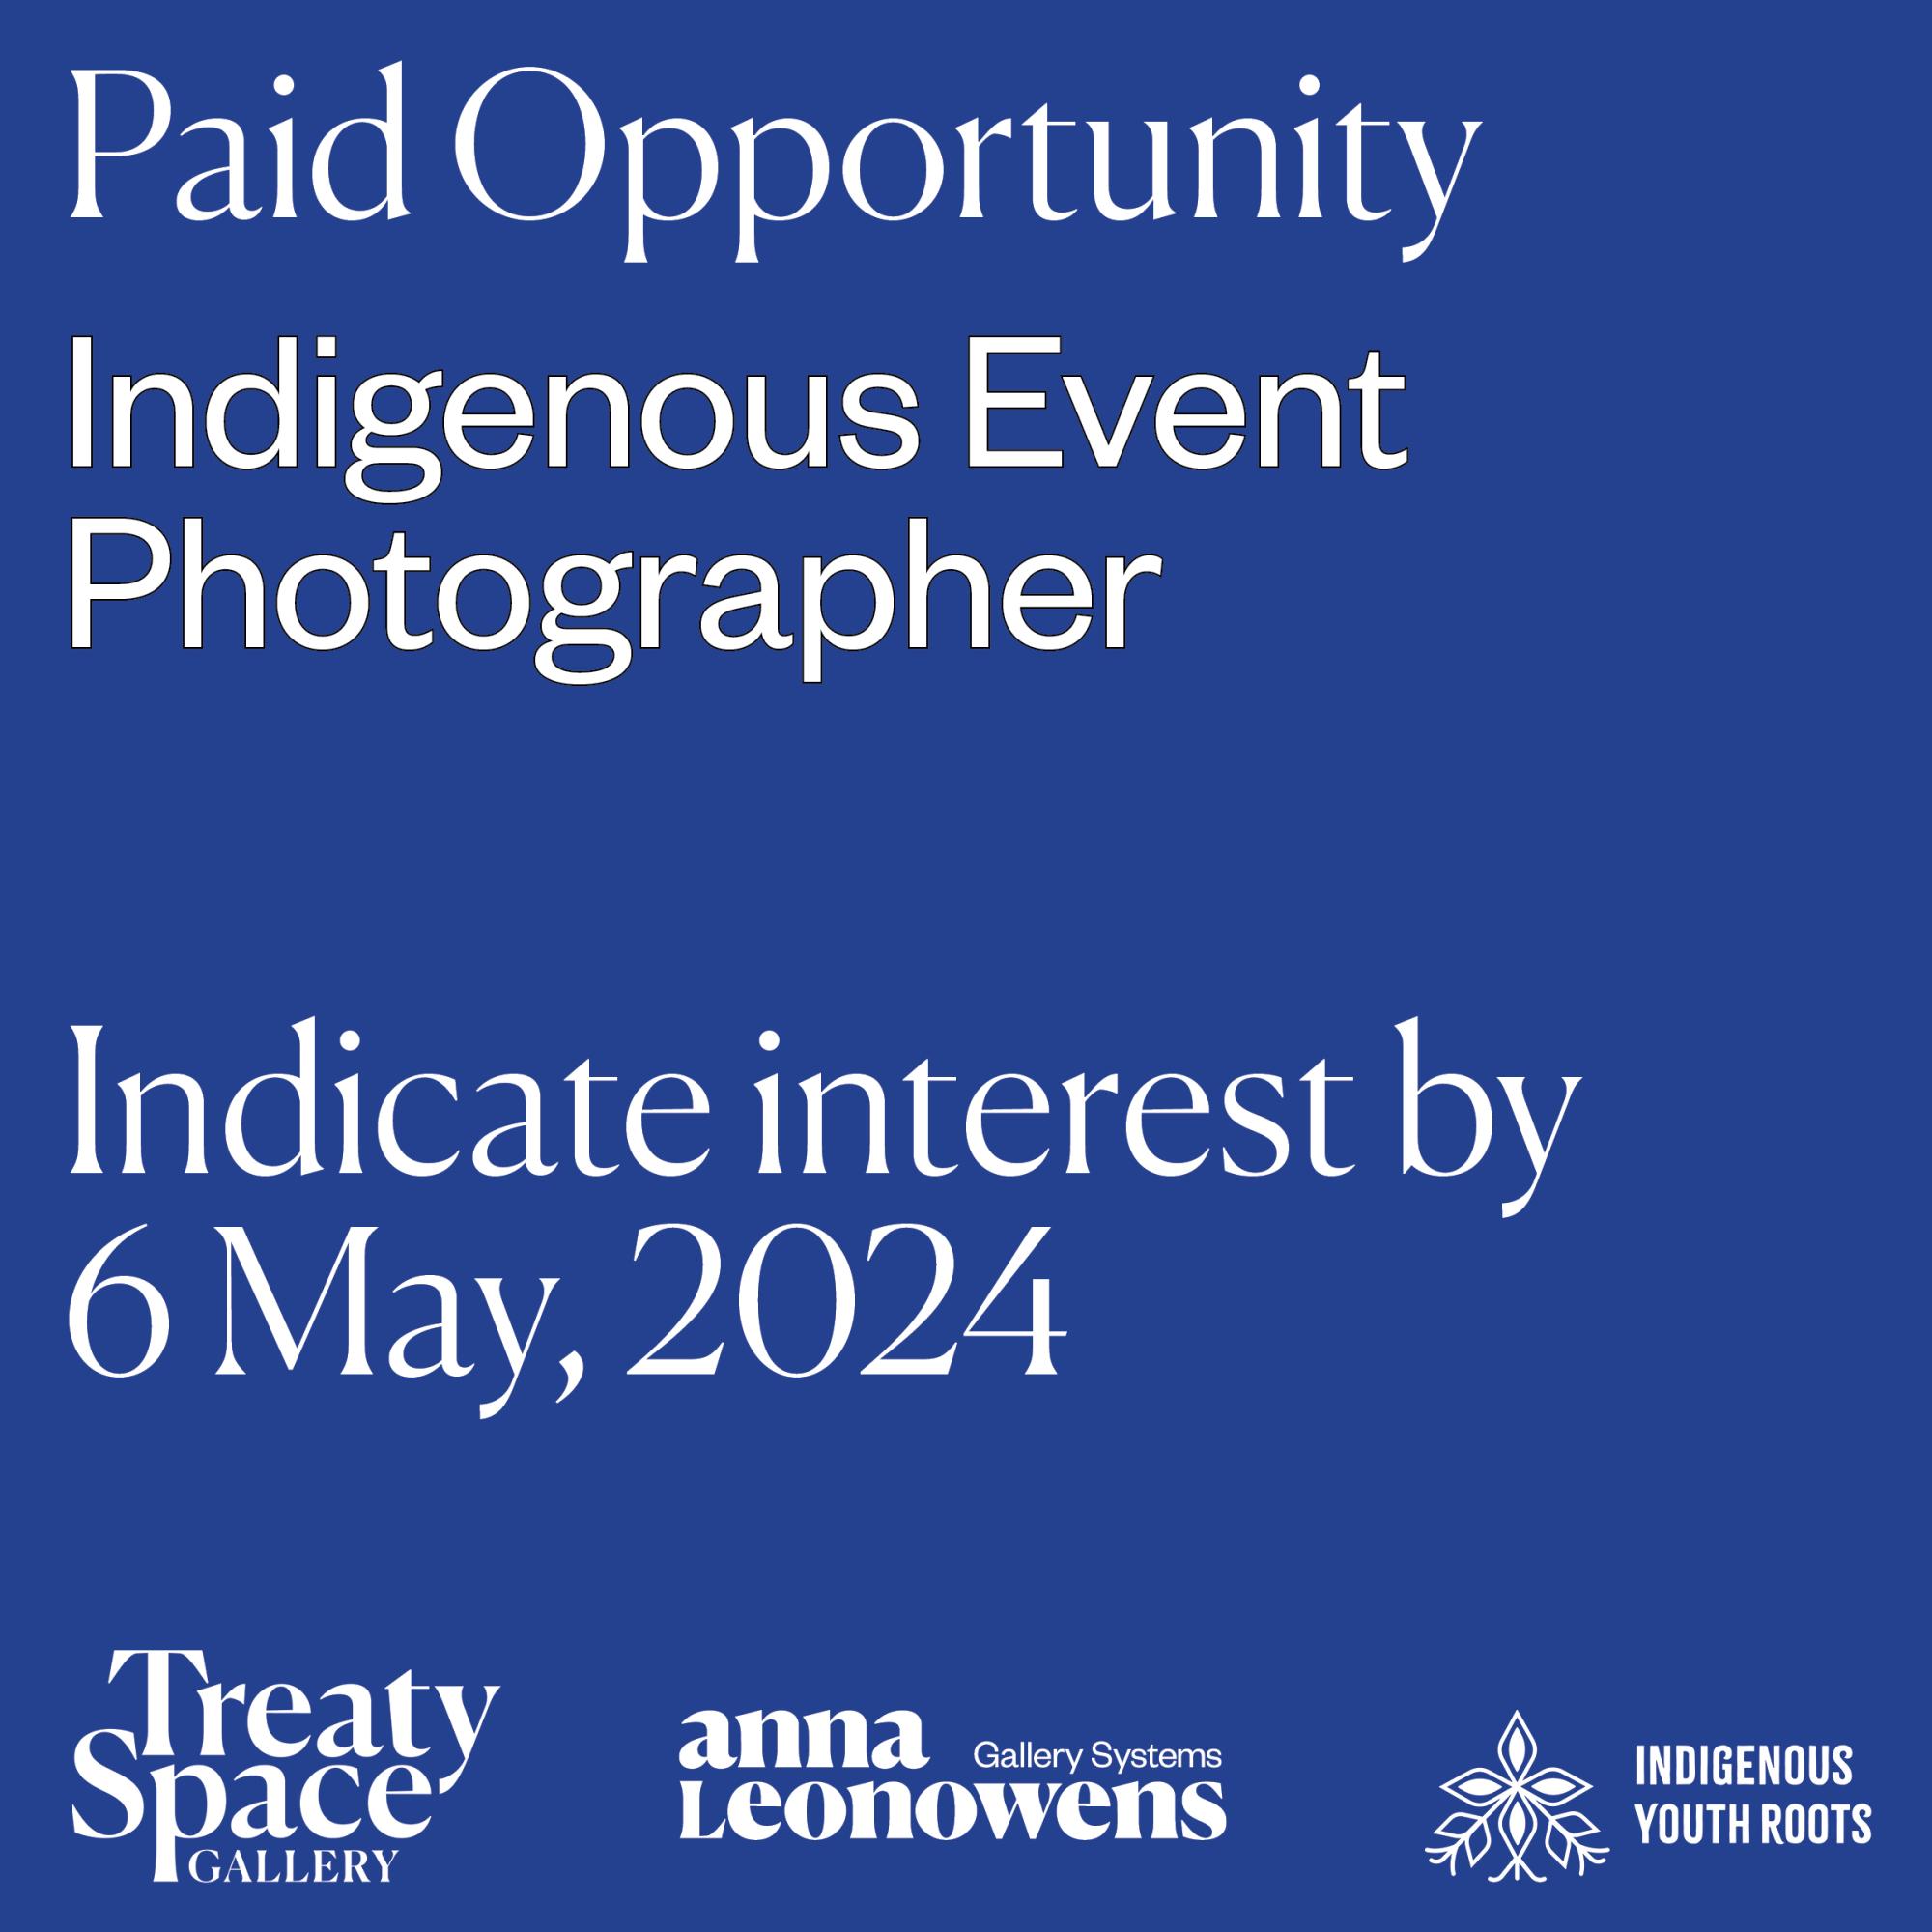 blue square with white text reading "paid opportunity: indigenous events photographer, indicate interest by 6 May, 2024" with white wordmark logos of Treaty Space Gallery, Anna Leonowens Gallery Systems, and Indigenous Youth Roots along bottom